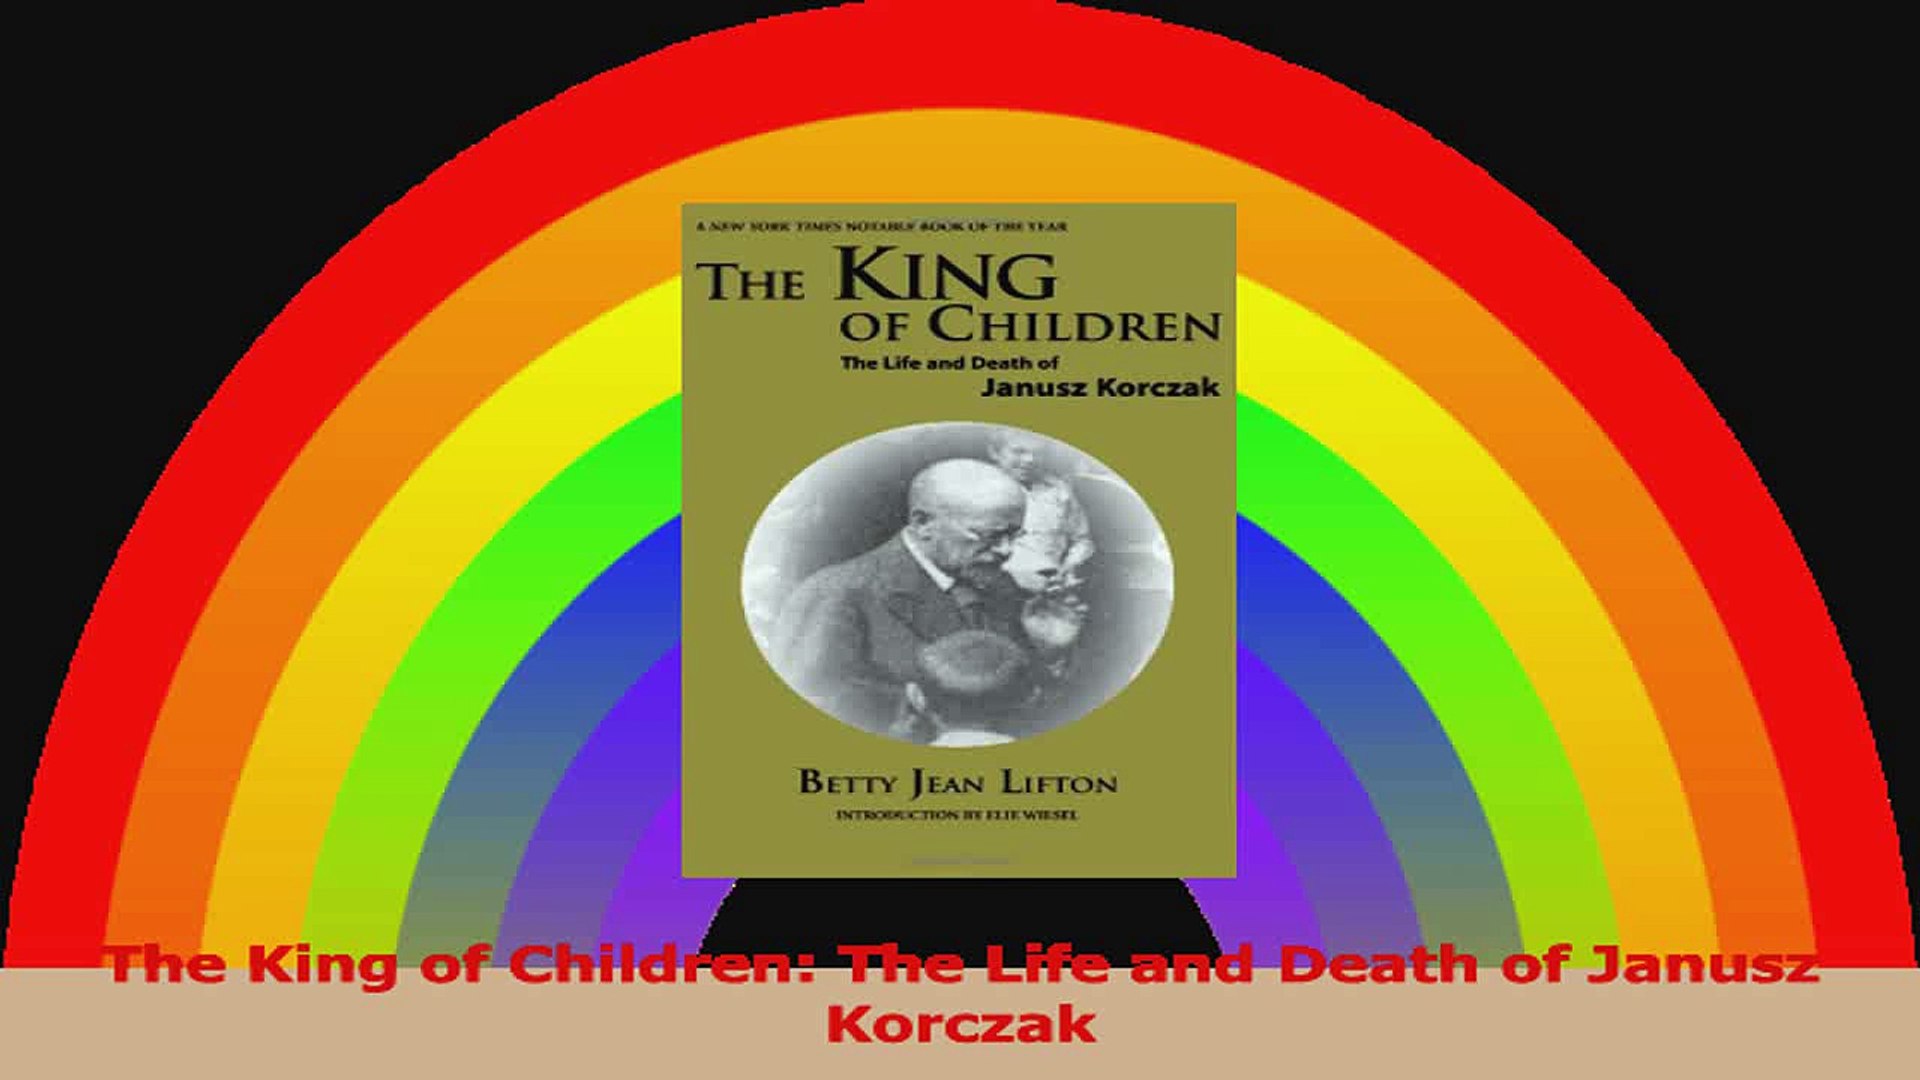 The Life and Death of Janusz Korczak The King of Children